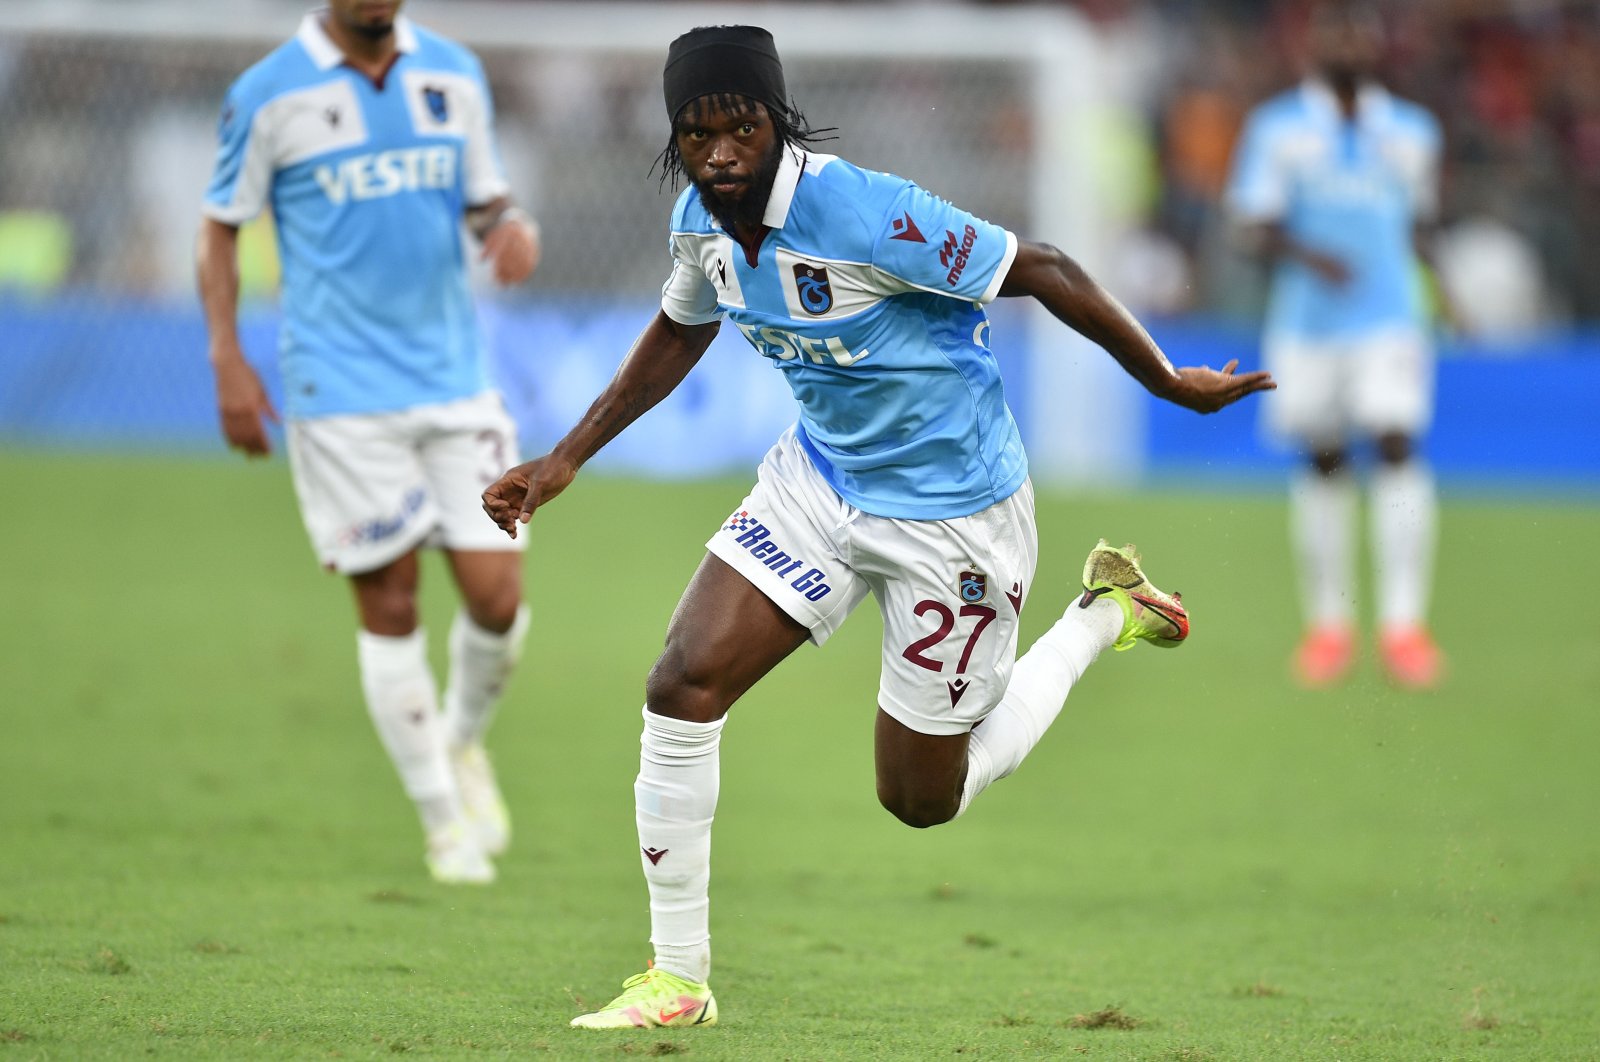 Trabzonspor's Gervinho in action during a Europa Conference League playoff against Roma at the Stadio Olimpico, Rome, Italy, Aug. 26, 2021. (AA Photo)